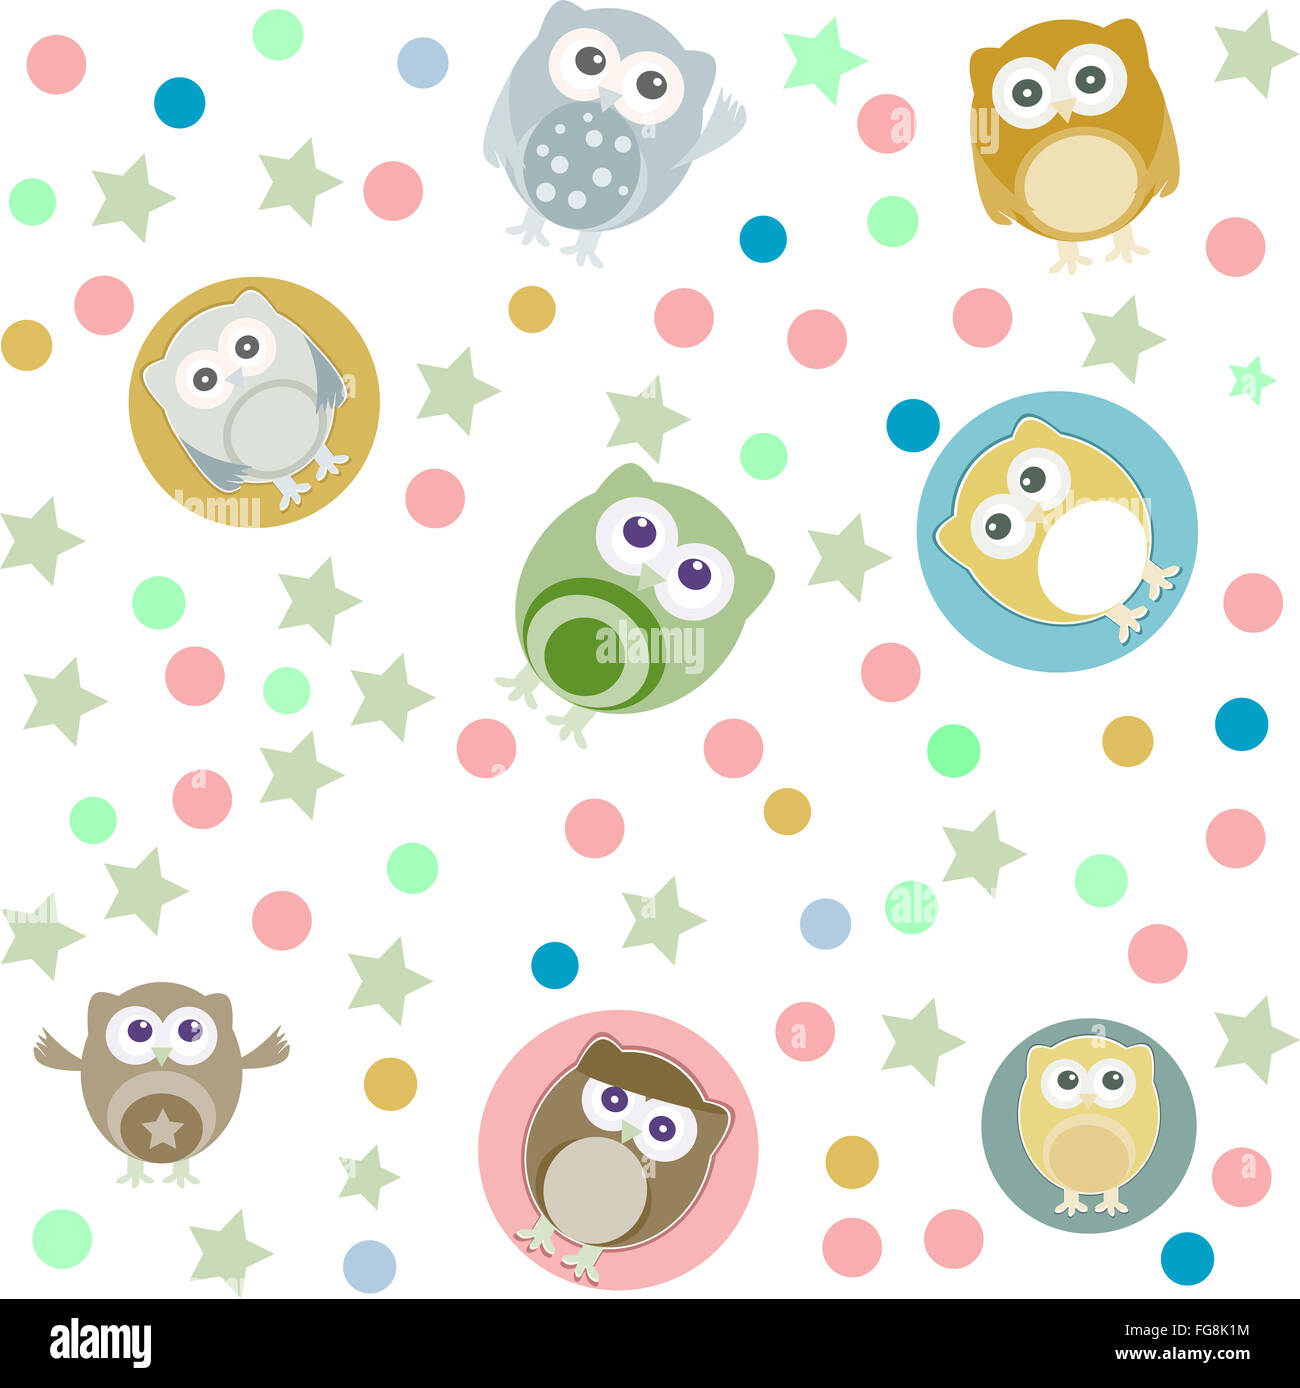 Bright background with owls, stars and circles. Seamless pattern Stock Photo